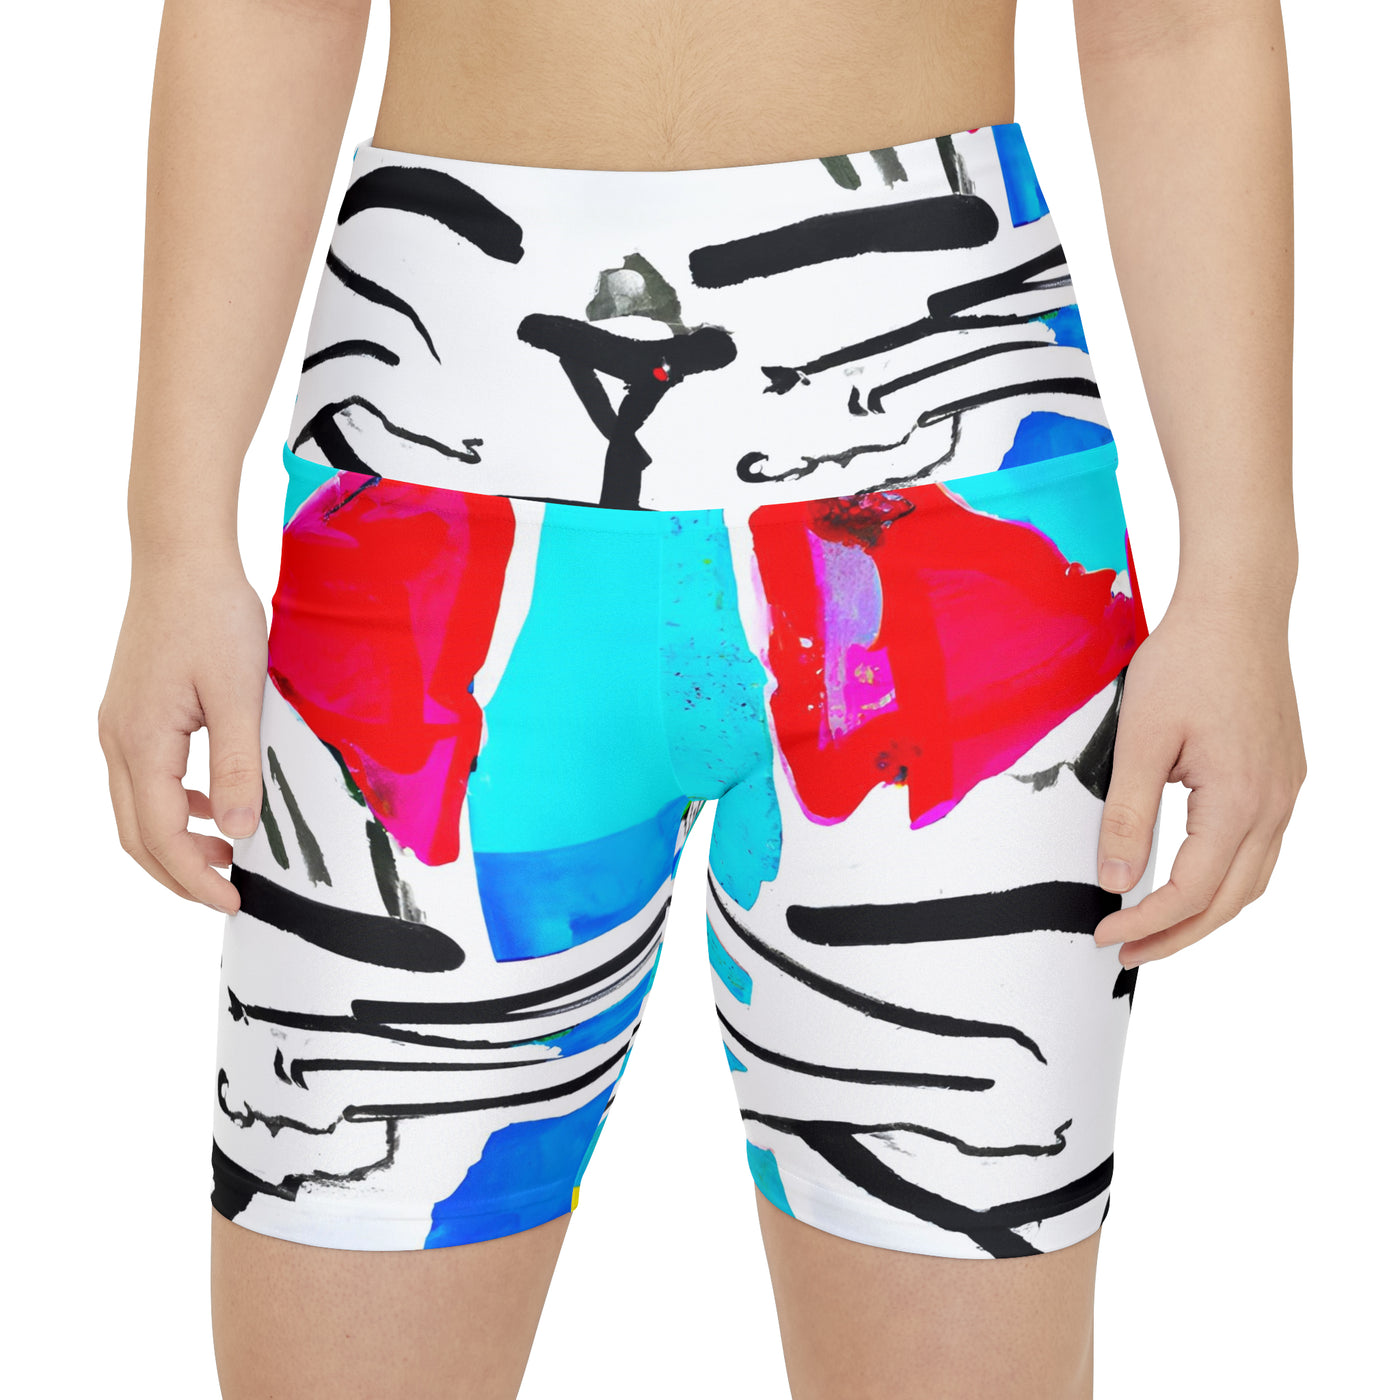 "Purrfect Pals: A Celebration of Happy Cats" Women's Workout Shorts